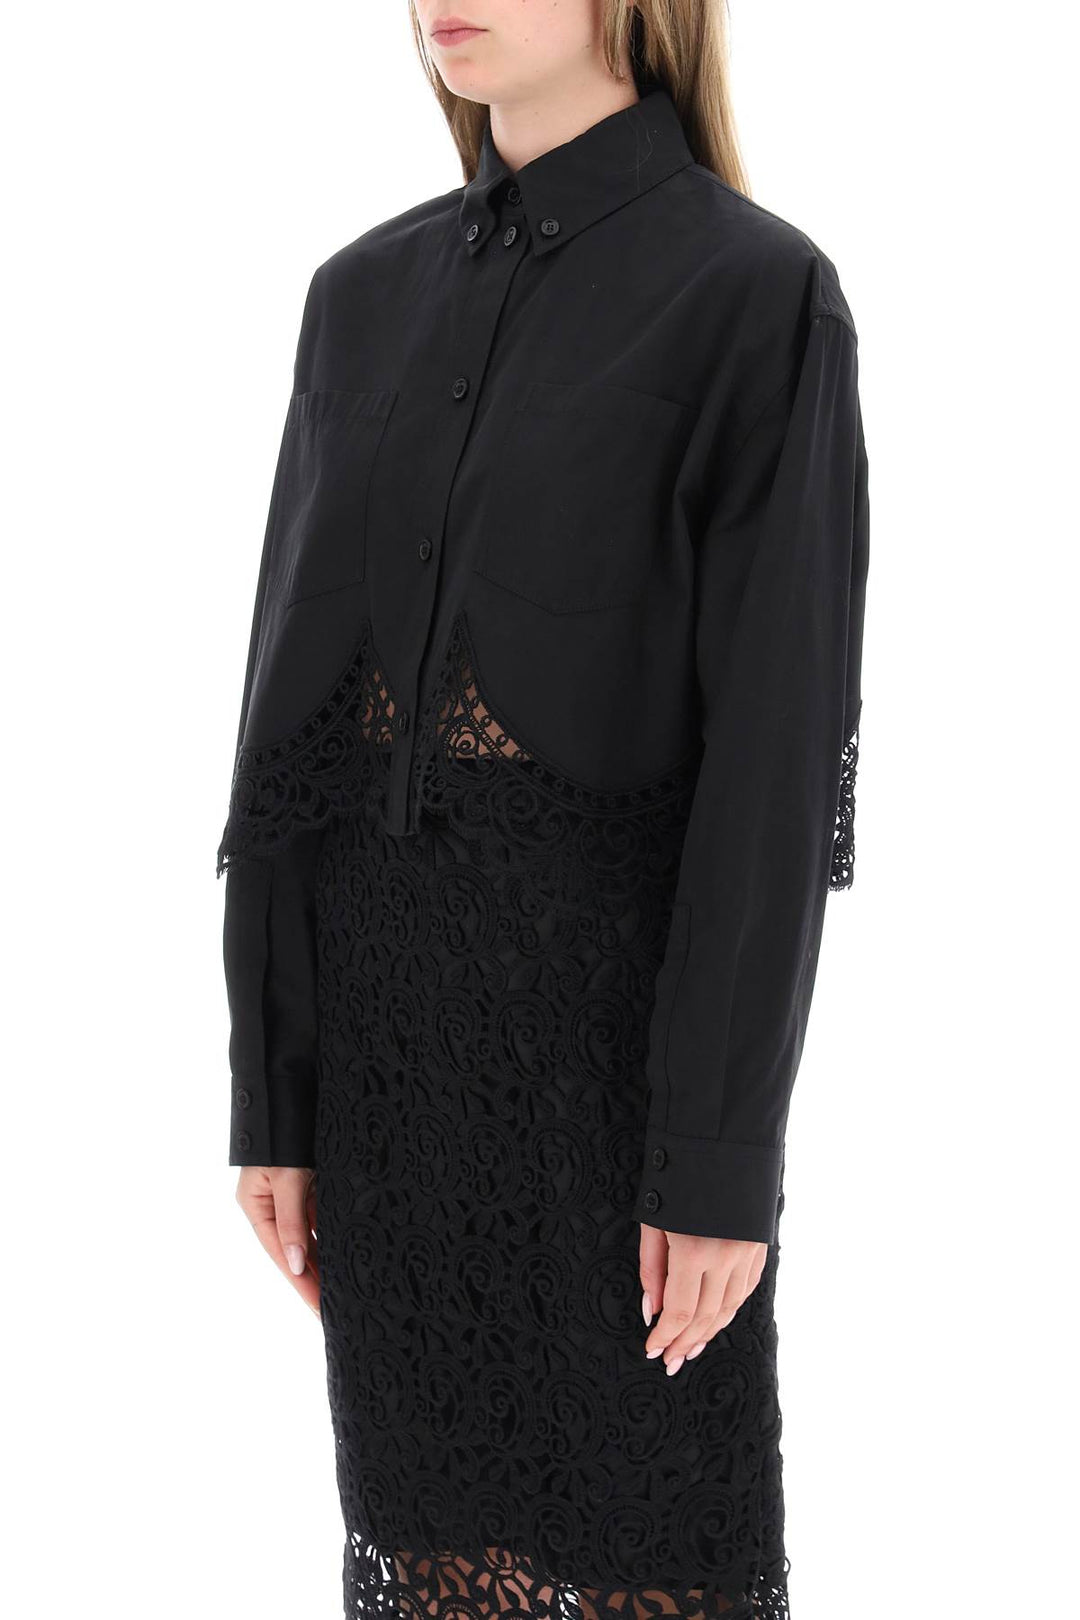 Burberry Cropped Shirt With Macrame Lace Insert   Nero